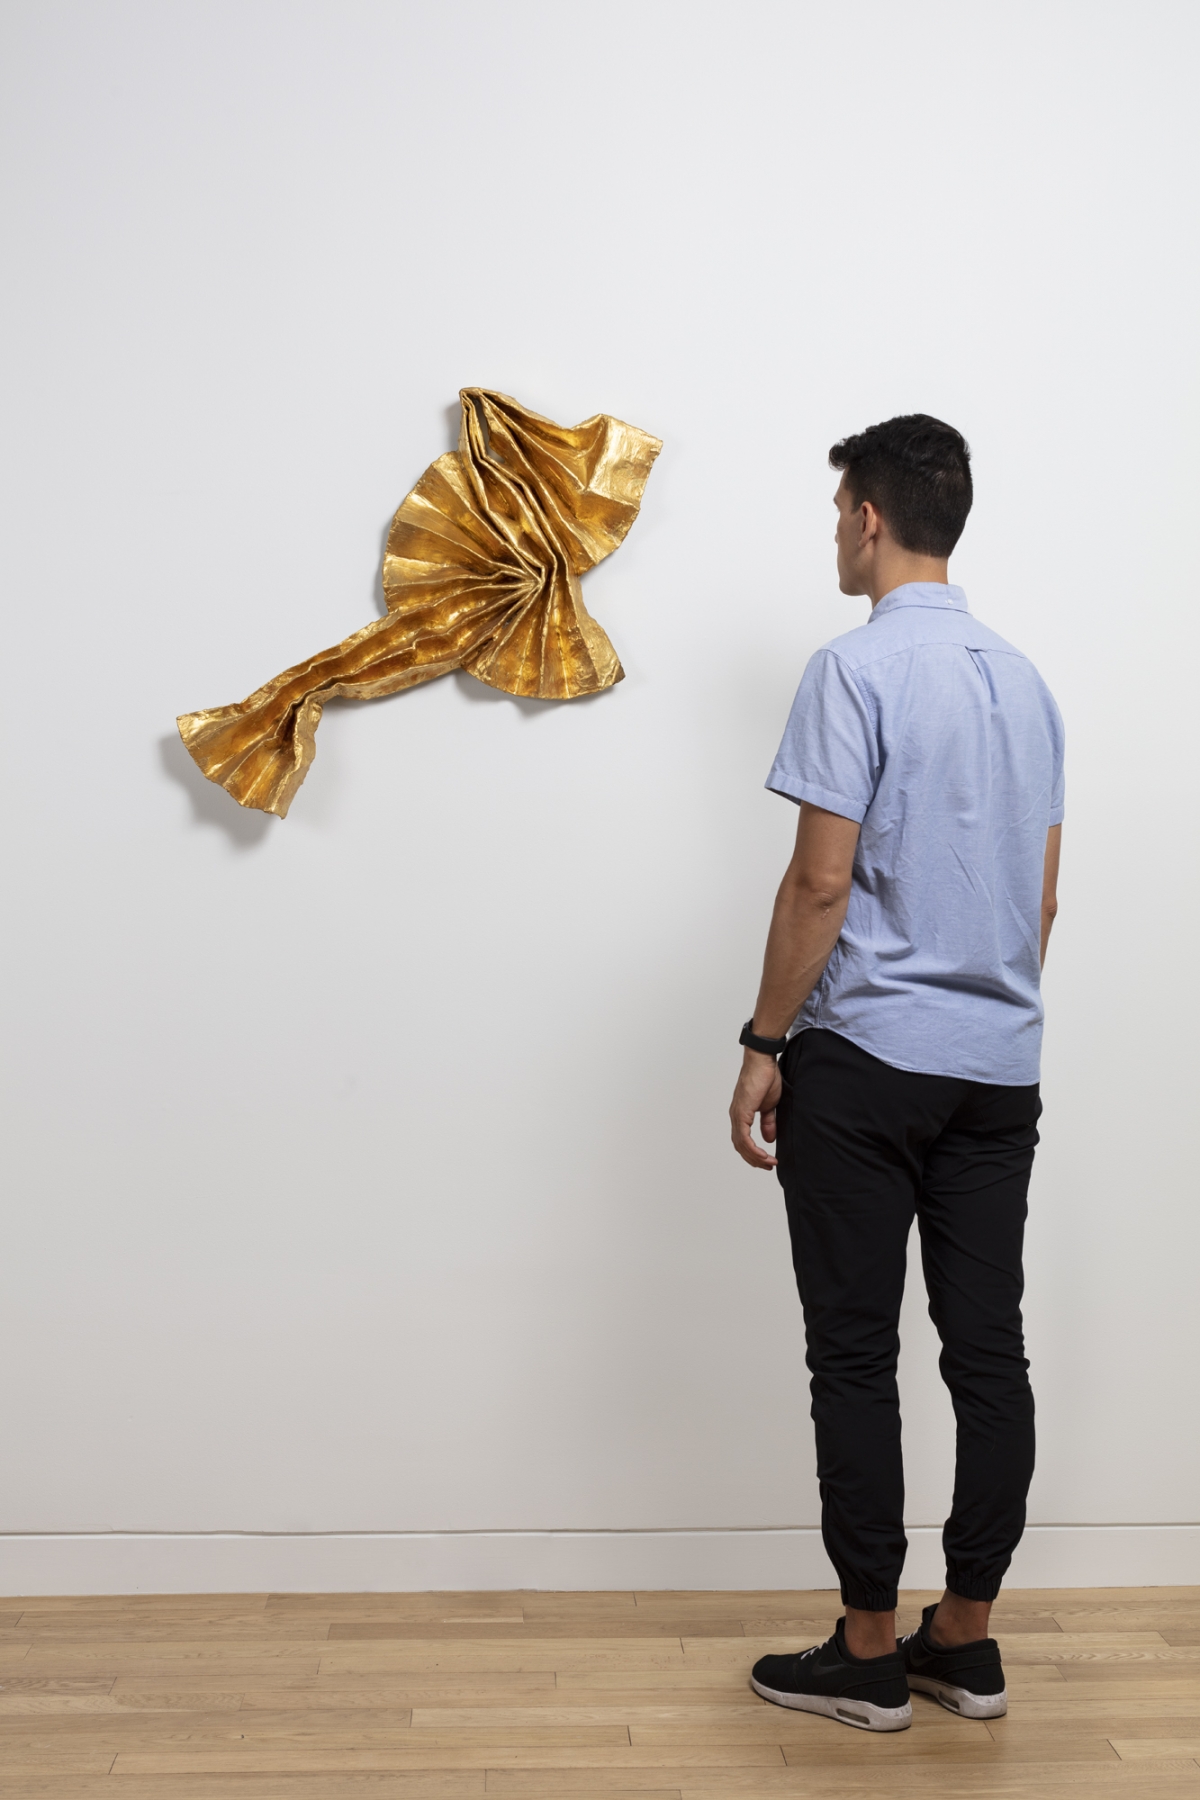 Lynda Benglis
FAN BIRD&nbsp; 1979
Brass wire screen, plaster, gesso, oil based size, gold leaf
35 x 22 x 4 1/2 inches
88.9 x 55.9 x 11.4 centimeters
CR# BE.40388